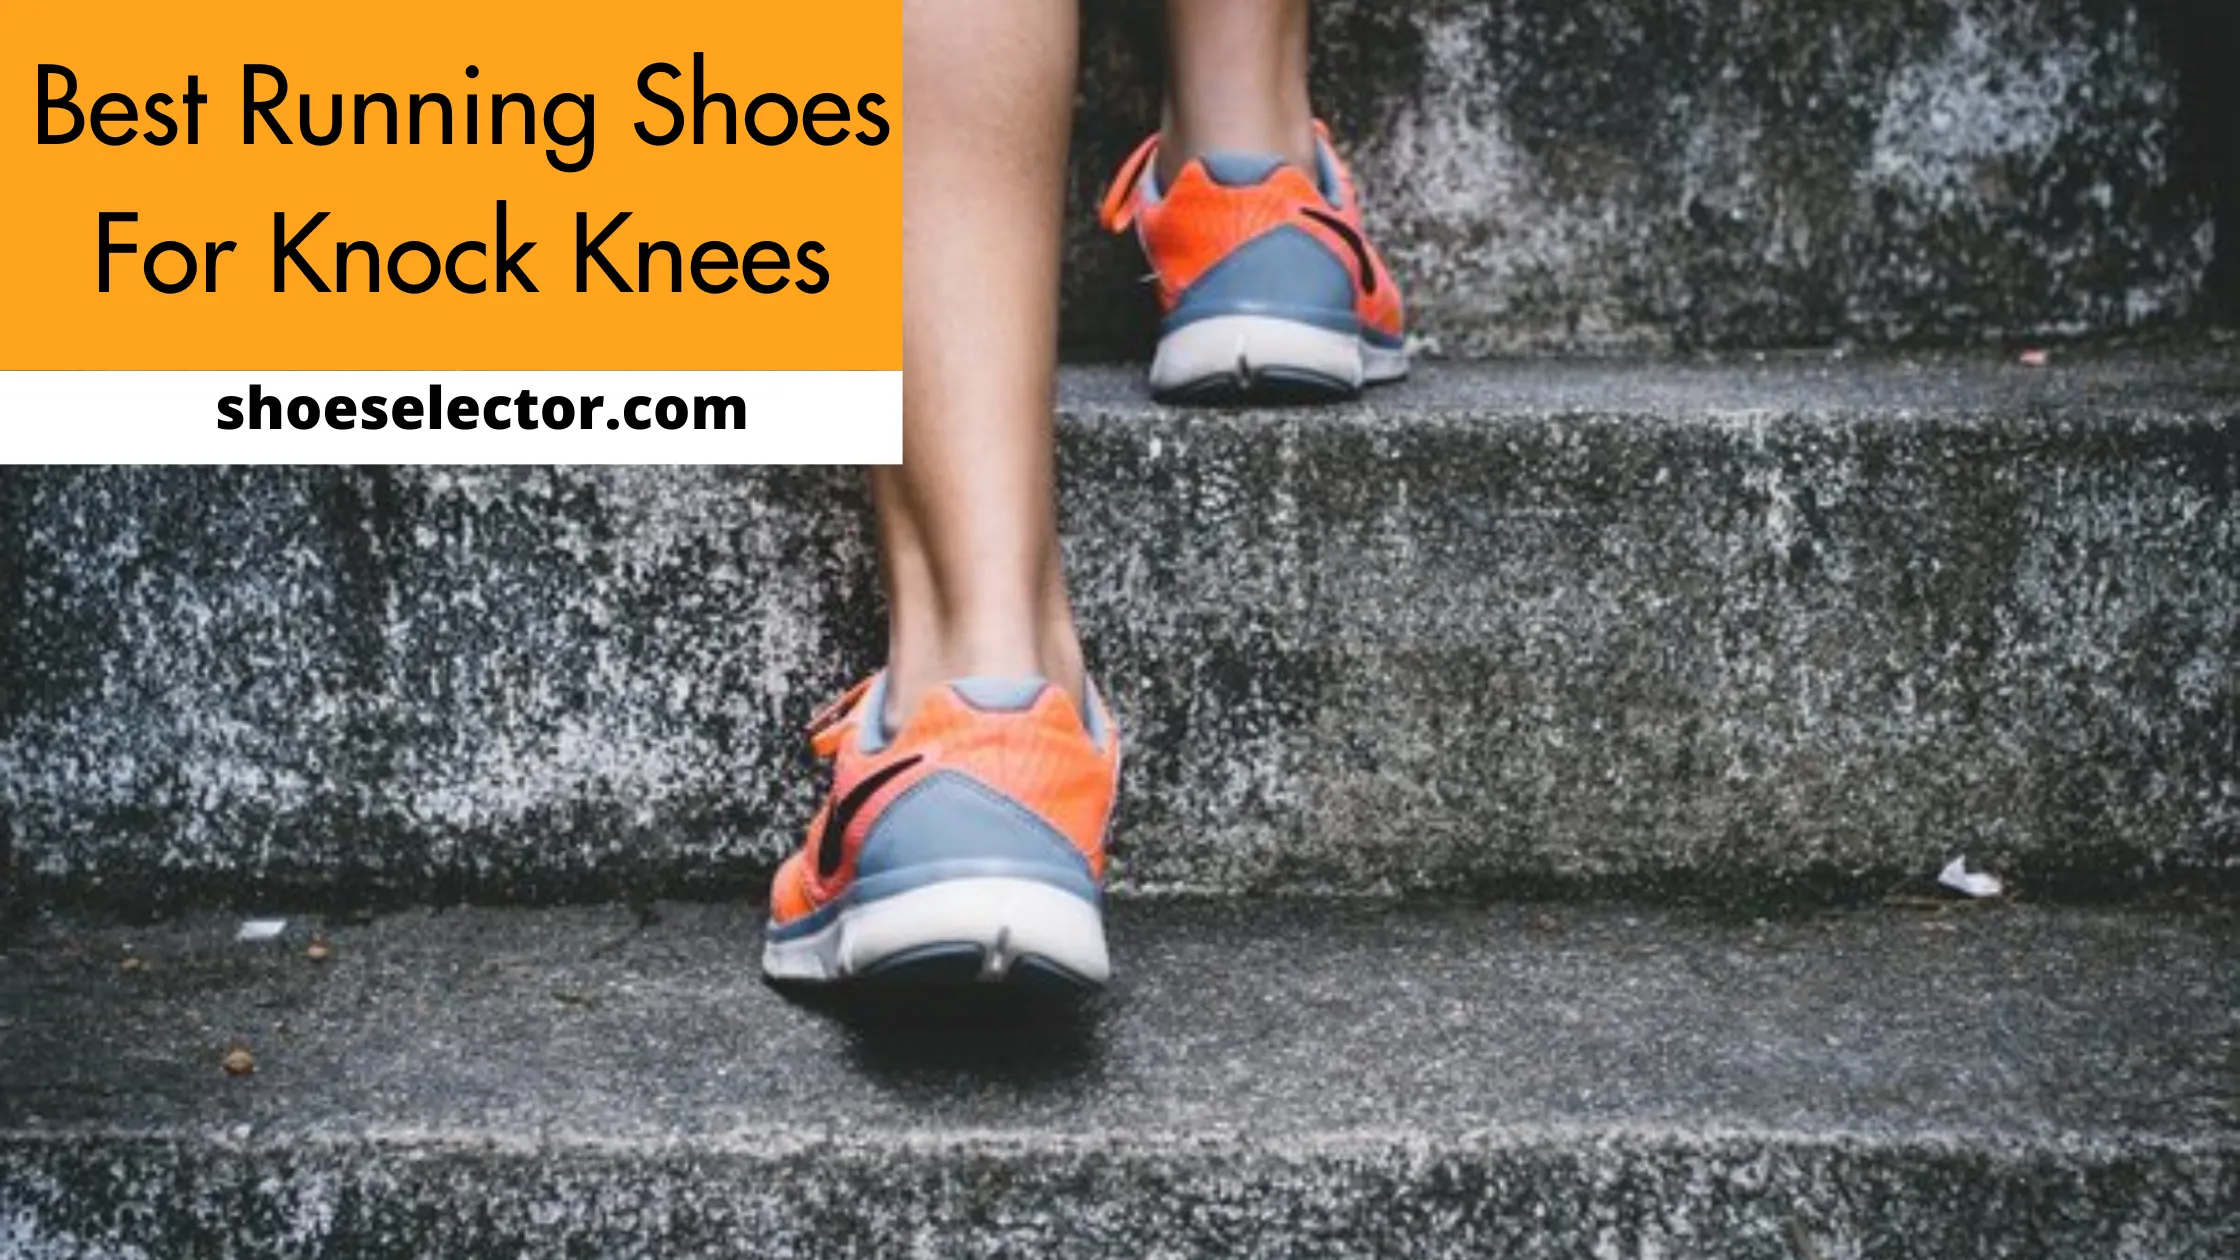 Best Running Shoes For Knock Knees - Comprehensive Guide